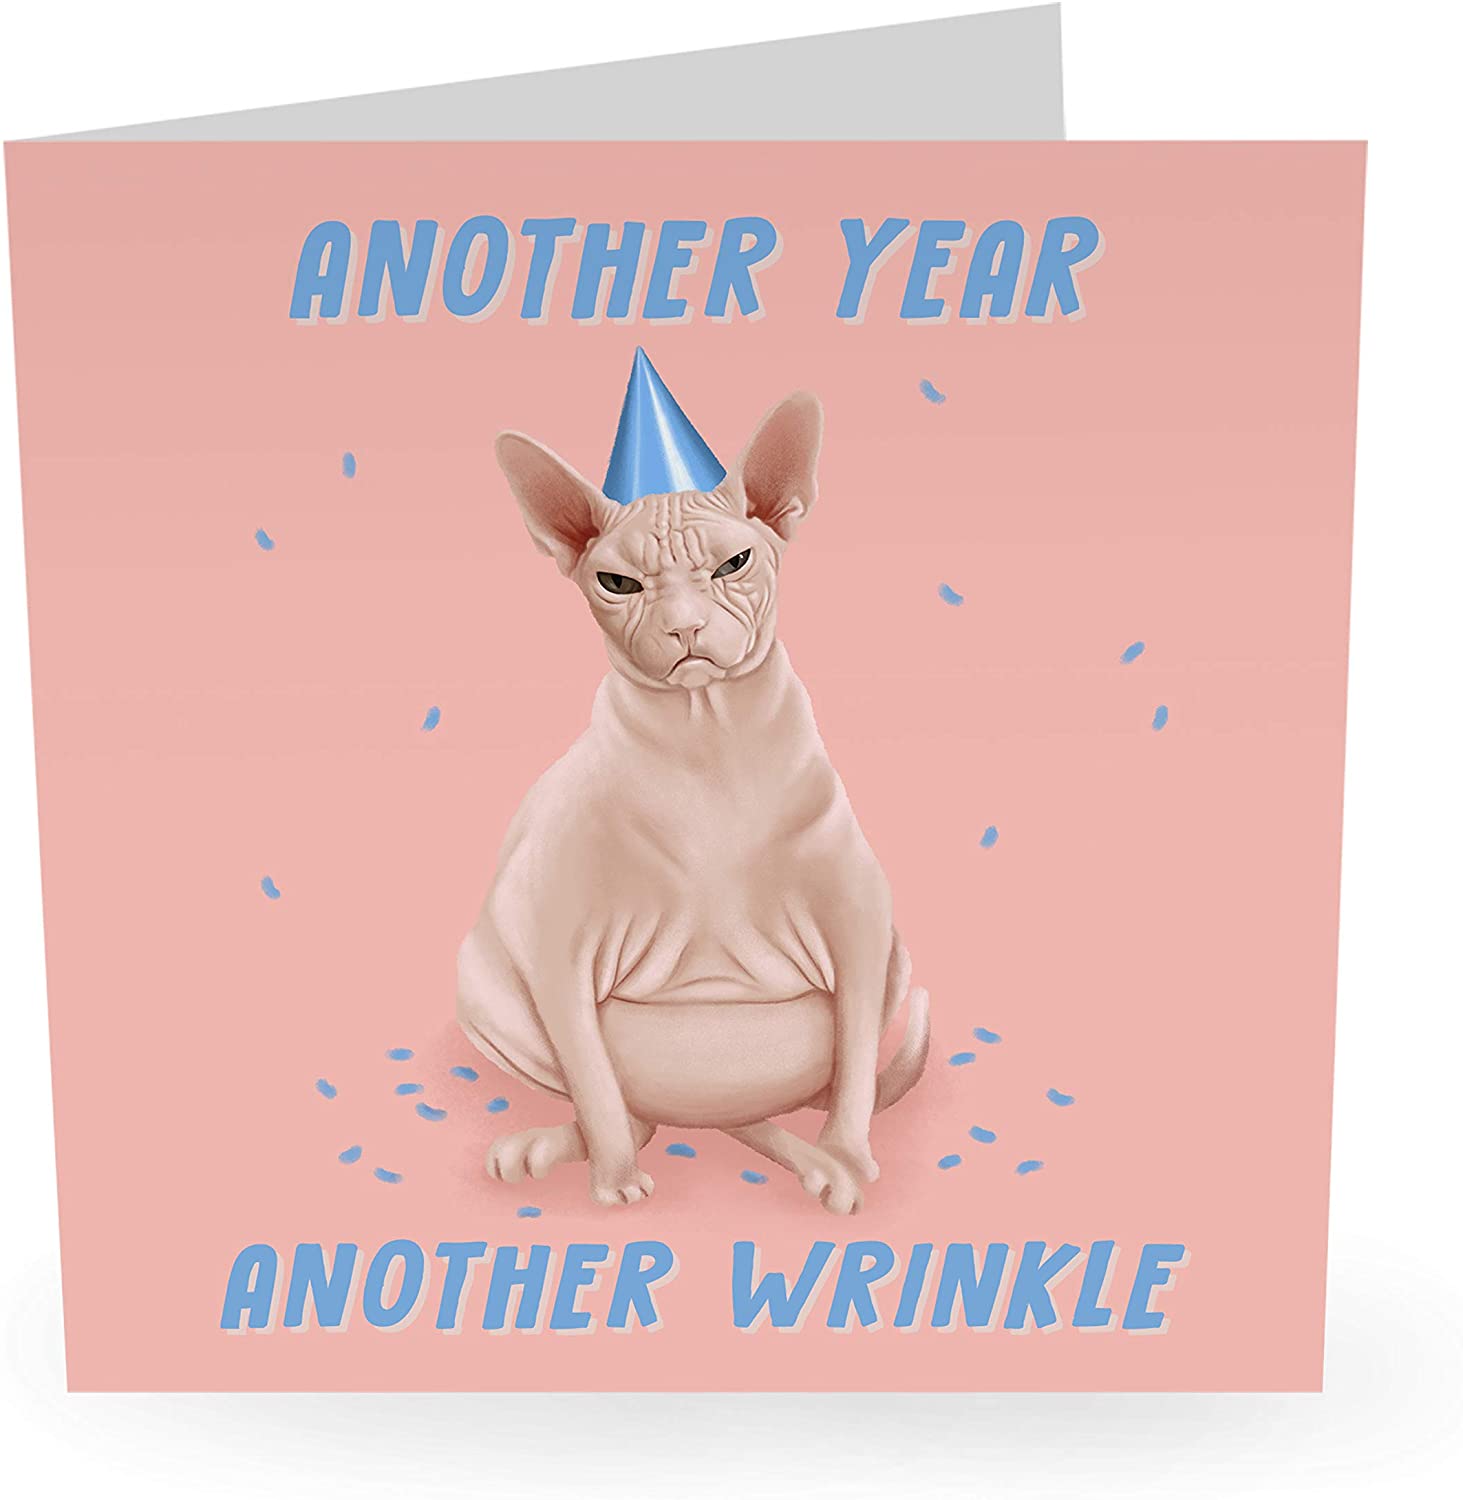 Central 23 - Funny Animal Birthday Card - “Sphynx Cat Another Year Another Wrinkle” - For Men & Women - Mom Dad Husband Wife Brother Sister 21st 25th 30th 40th 50th 60th - Comes with Fun Stickers